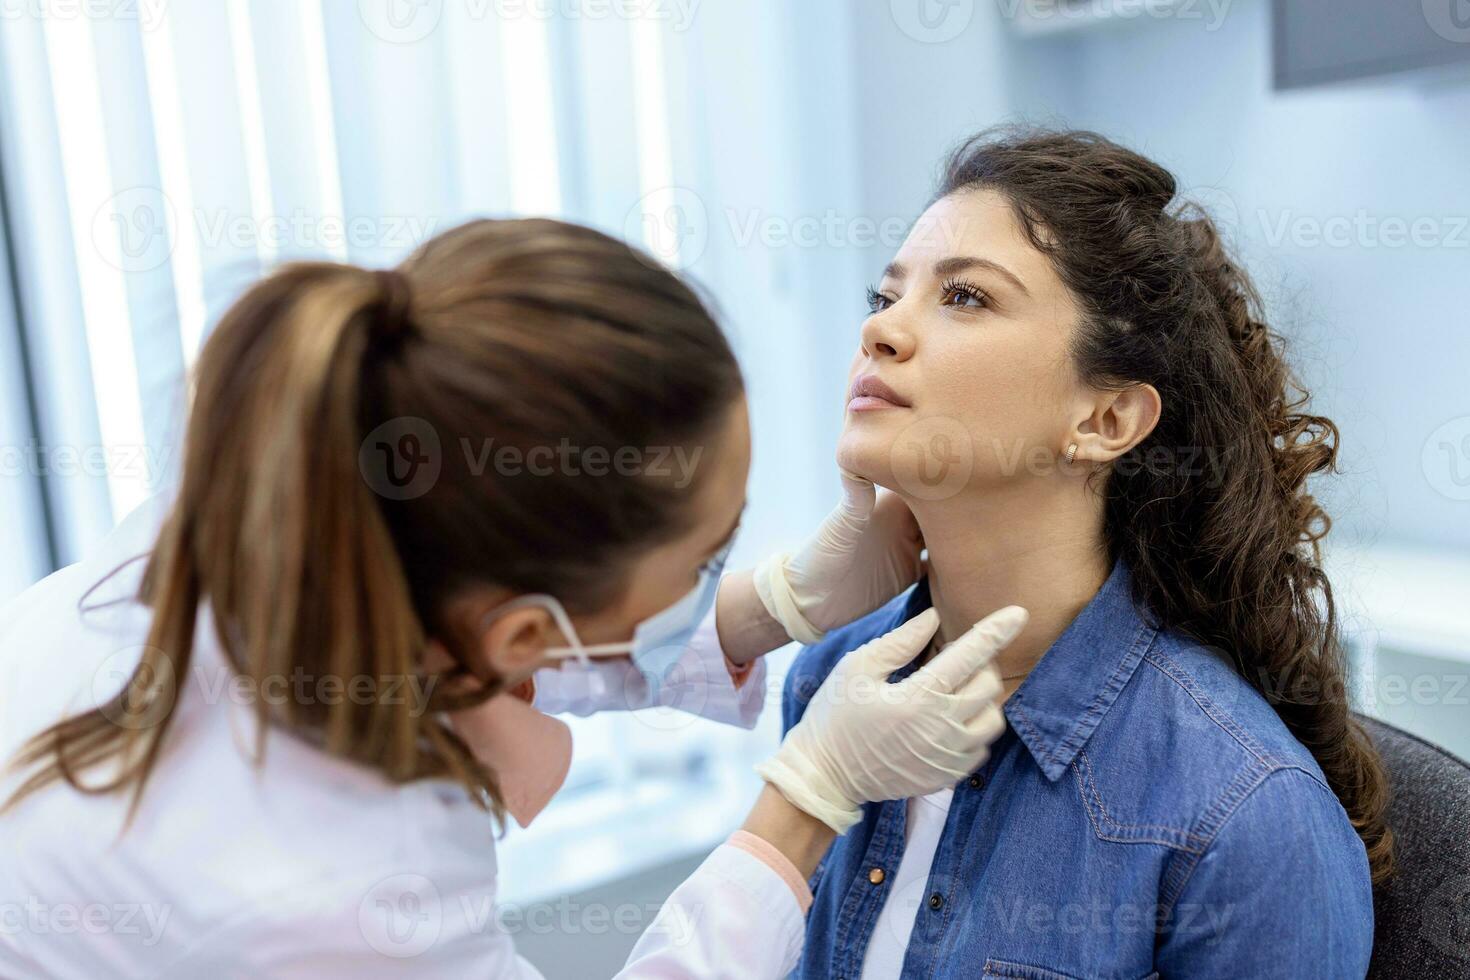 medicine, healthcare and medical exam concept - doctor or nurse checking patient's tonsils at hospital. Endocrinologist examining throat of young woman in clinic photo